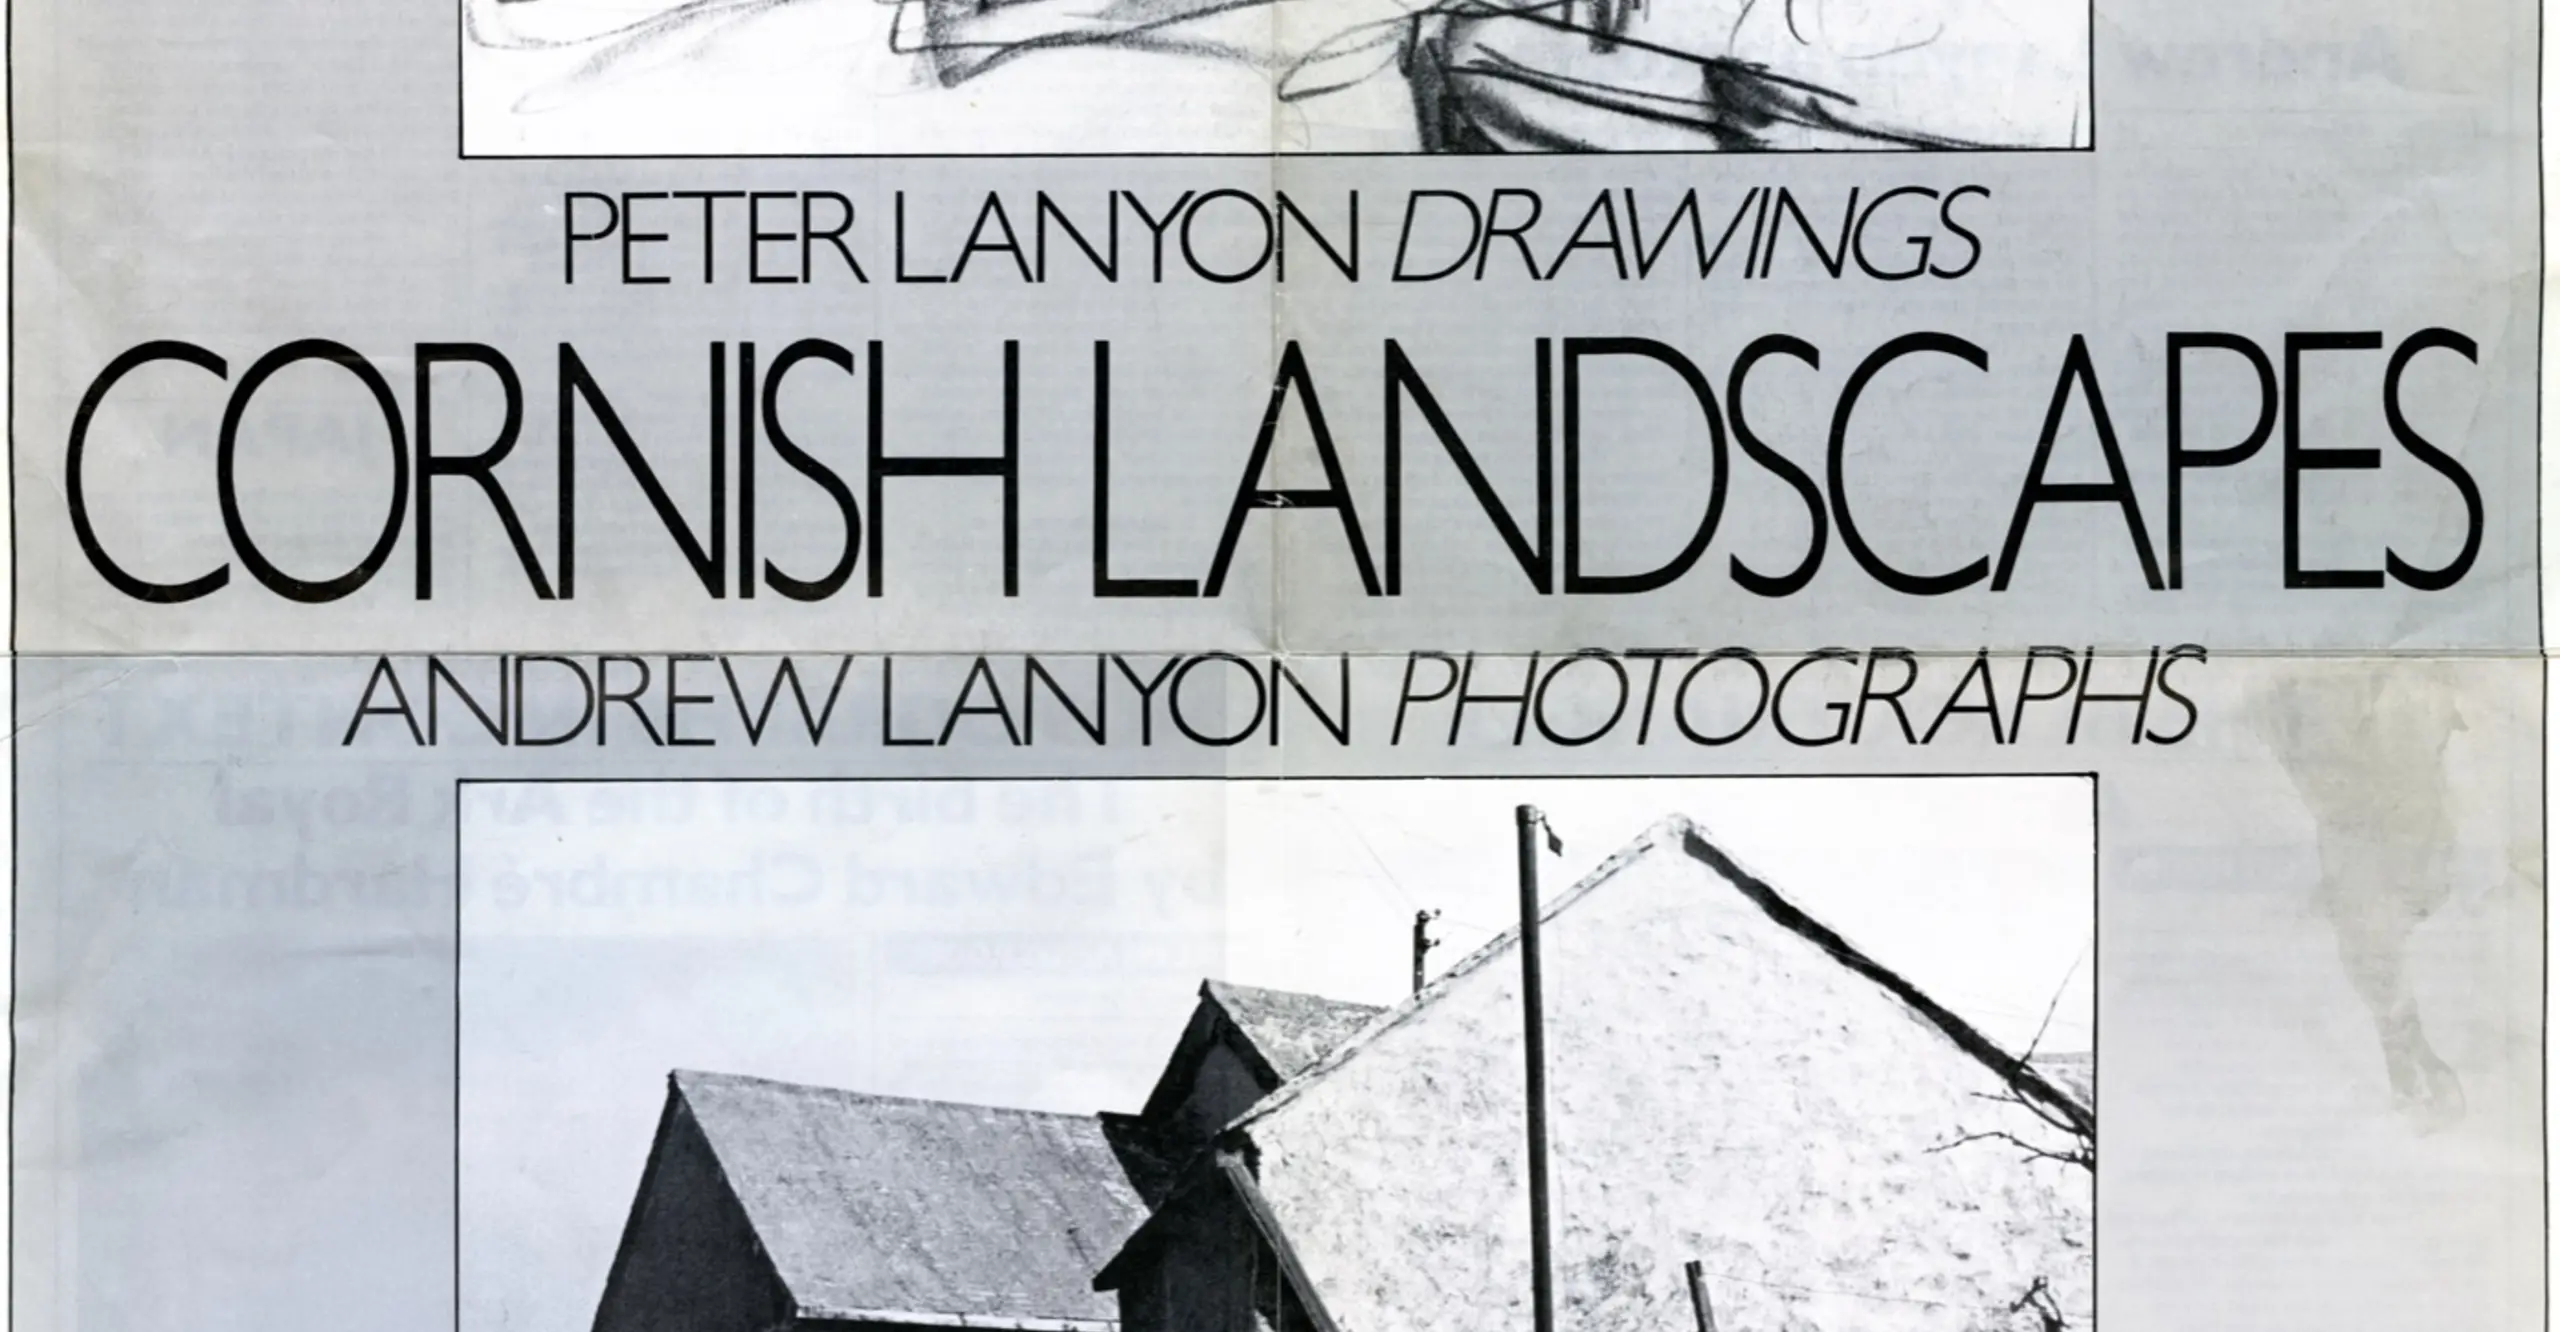 Exhibition Poster, 1983. Courtesy The Photographers' Gallery Archive 